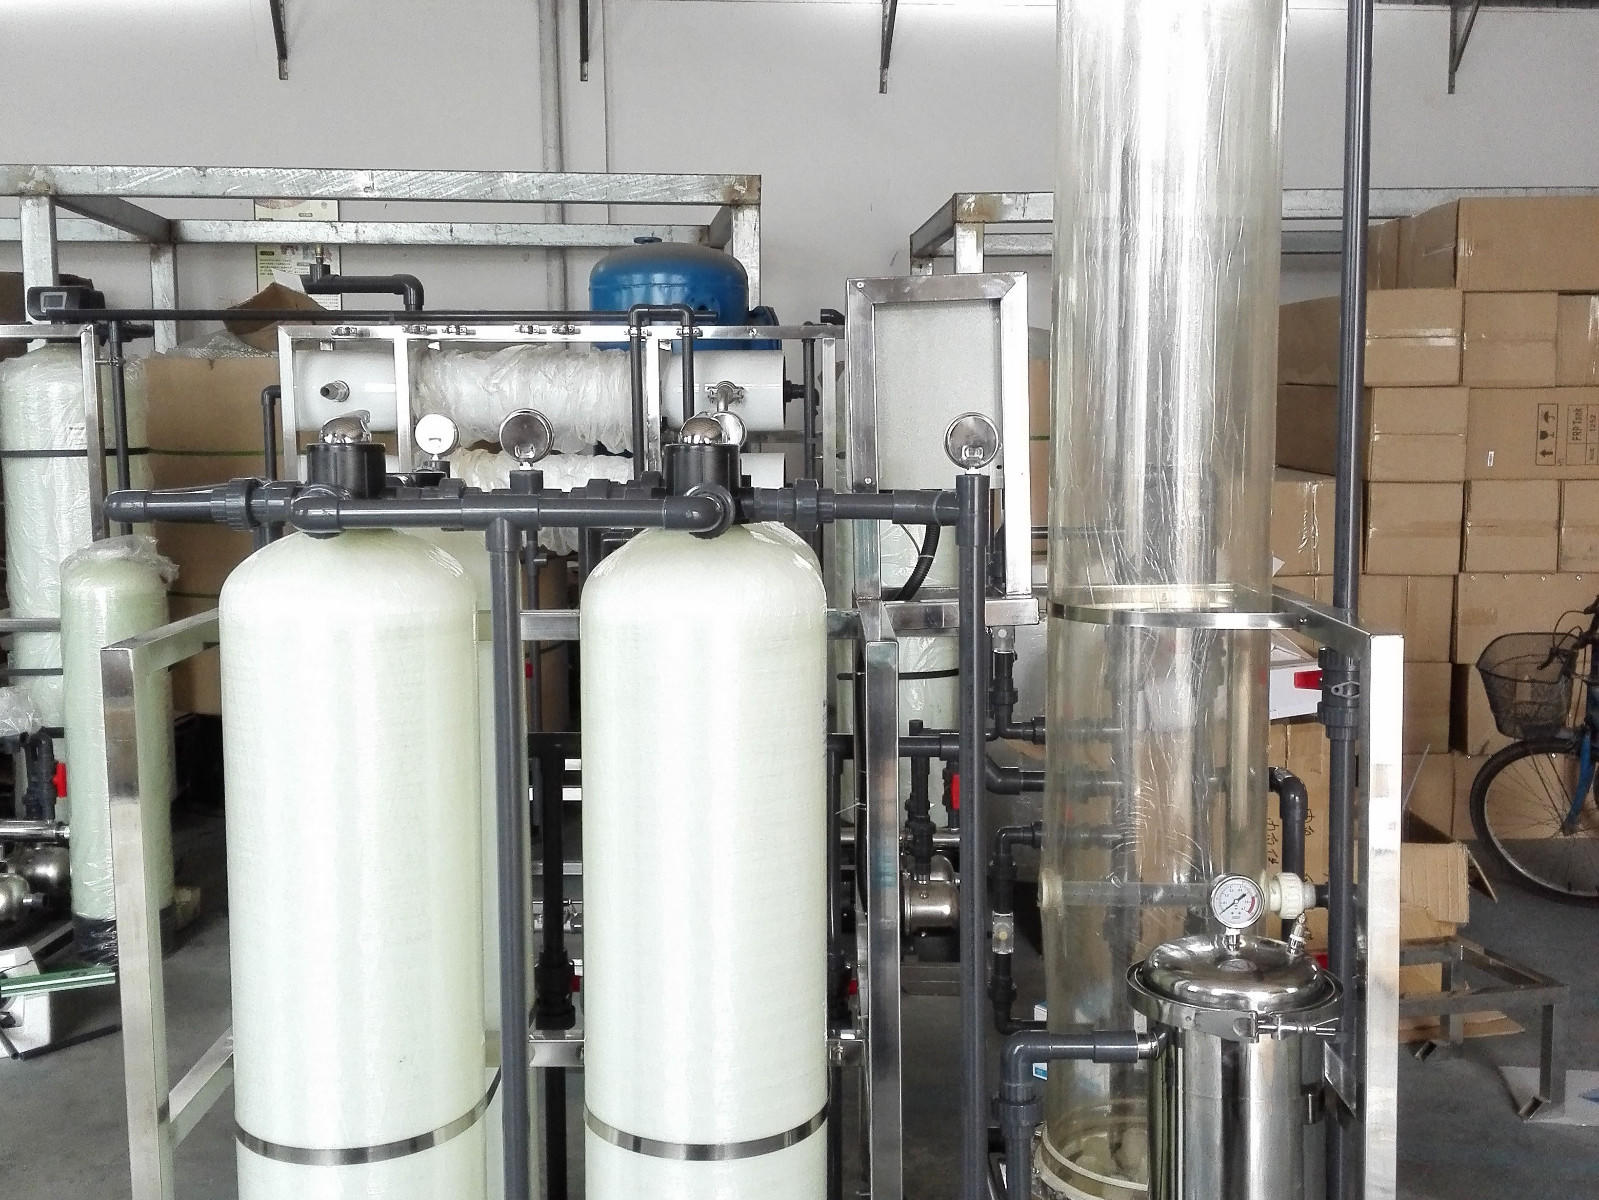 deionized water filter Ion exchange resins no so much waste water than ro Manual control type Ocpuritech Brand company